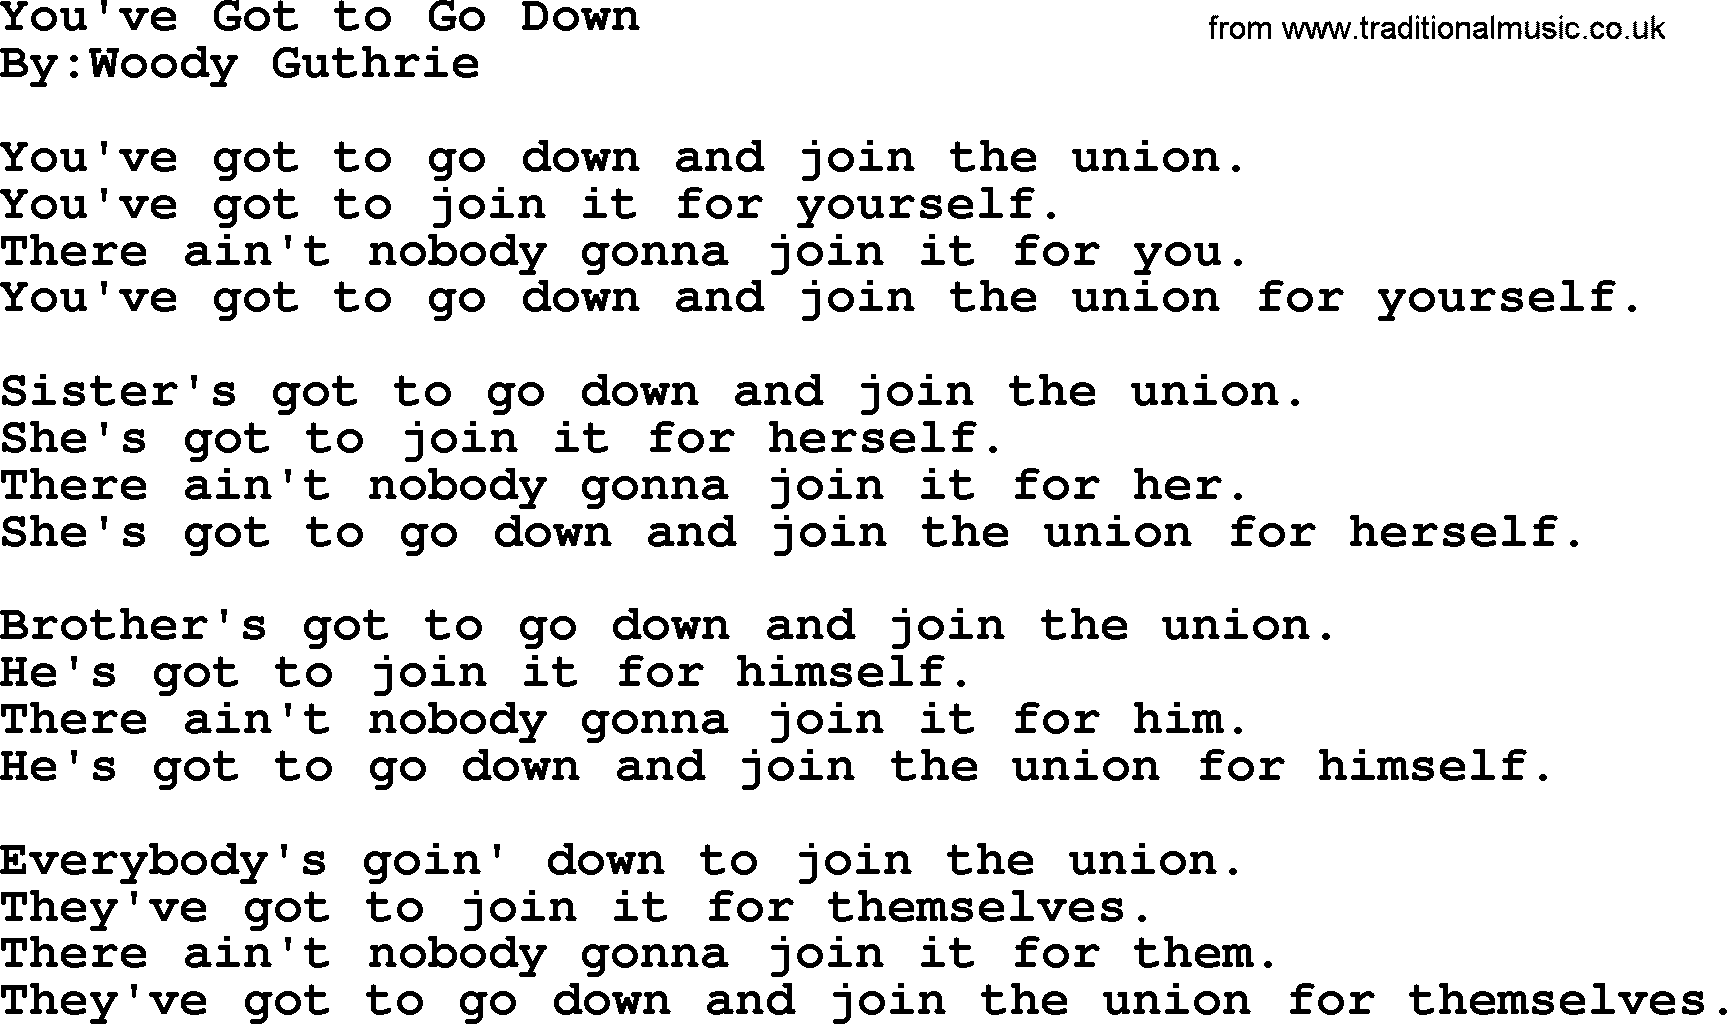 Political, Solidarity, Workers or Union song: Youve Got To Go Down, lyrics